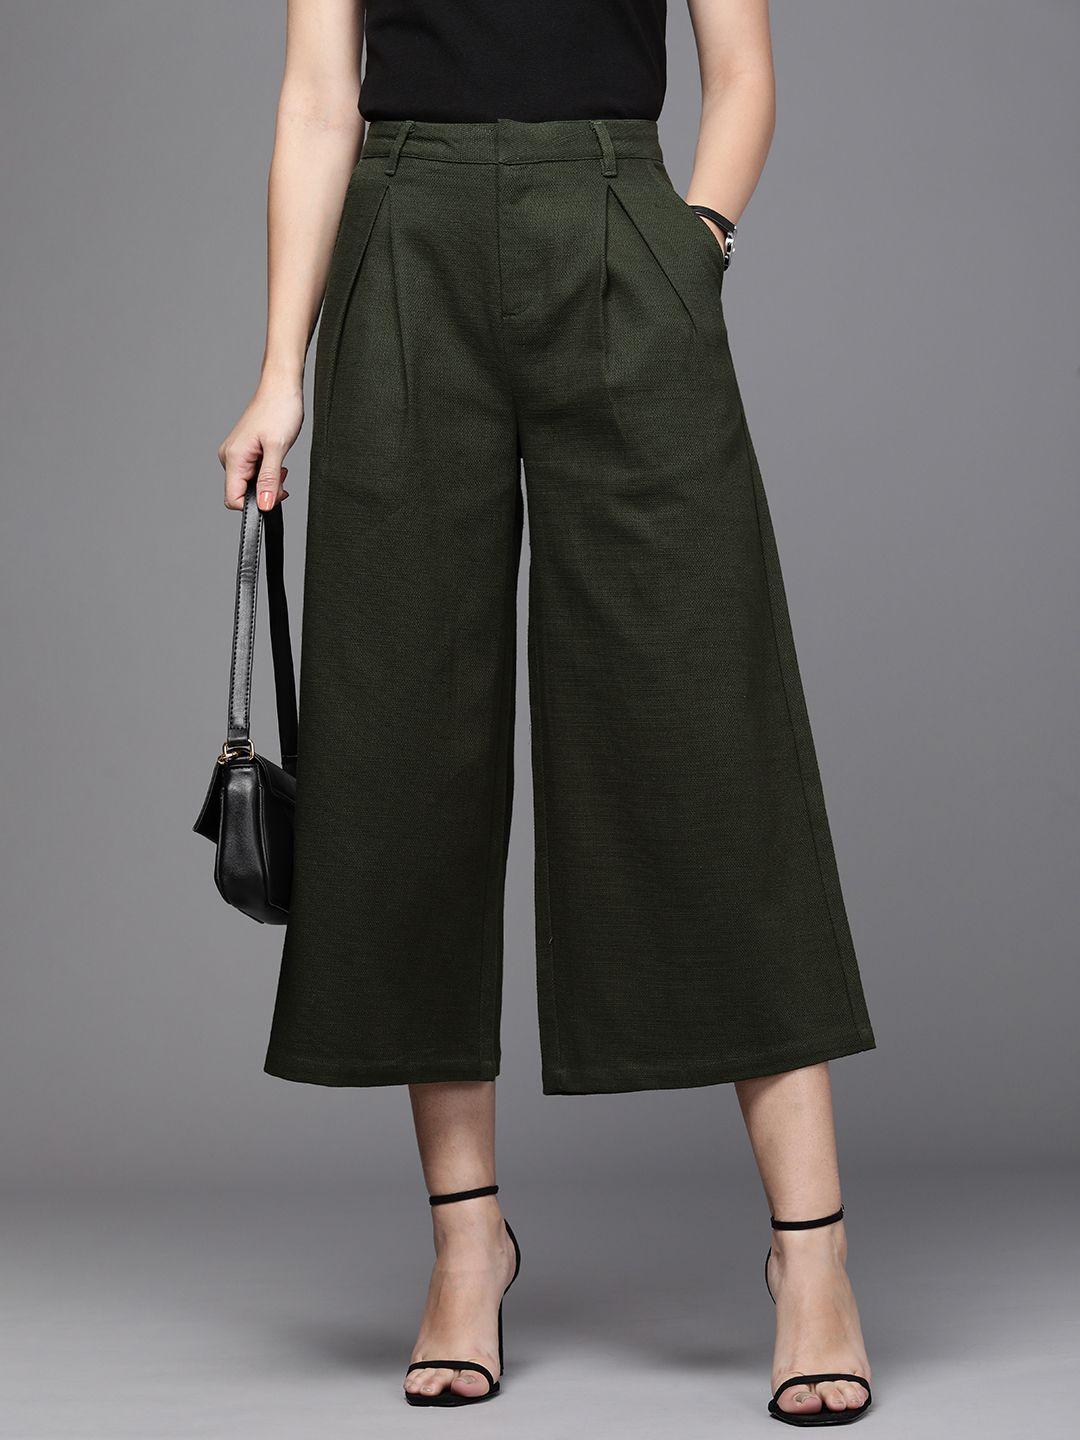 kenneth-cole-women-pure-cotton-textured-pleated-trousers